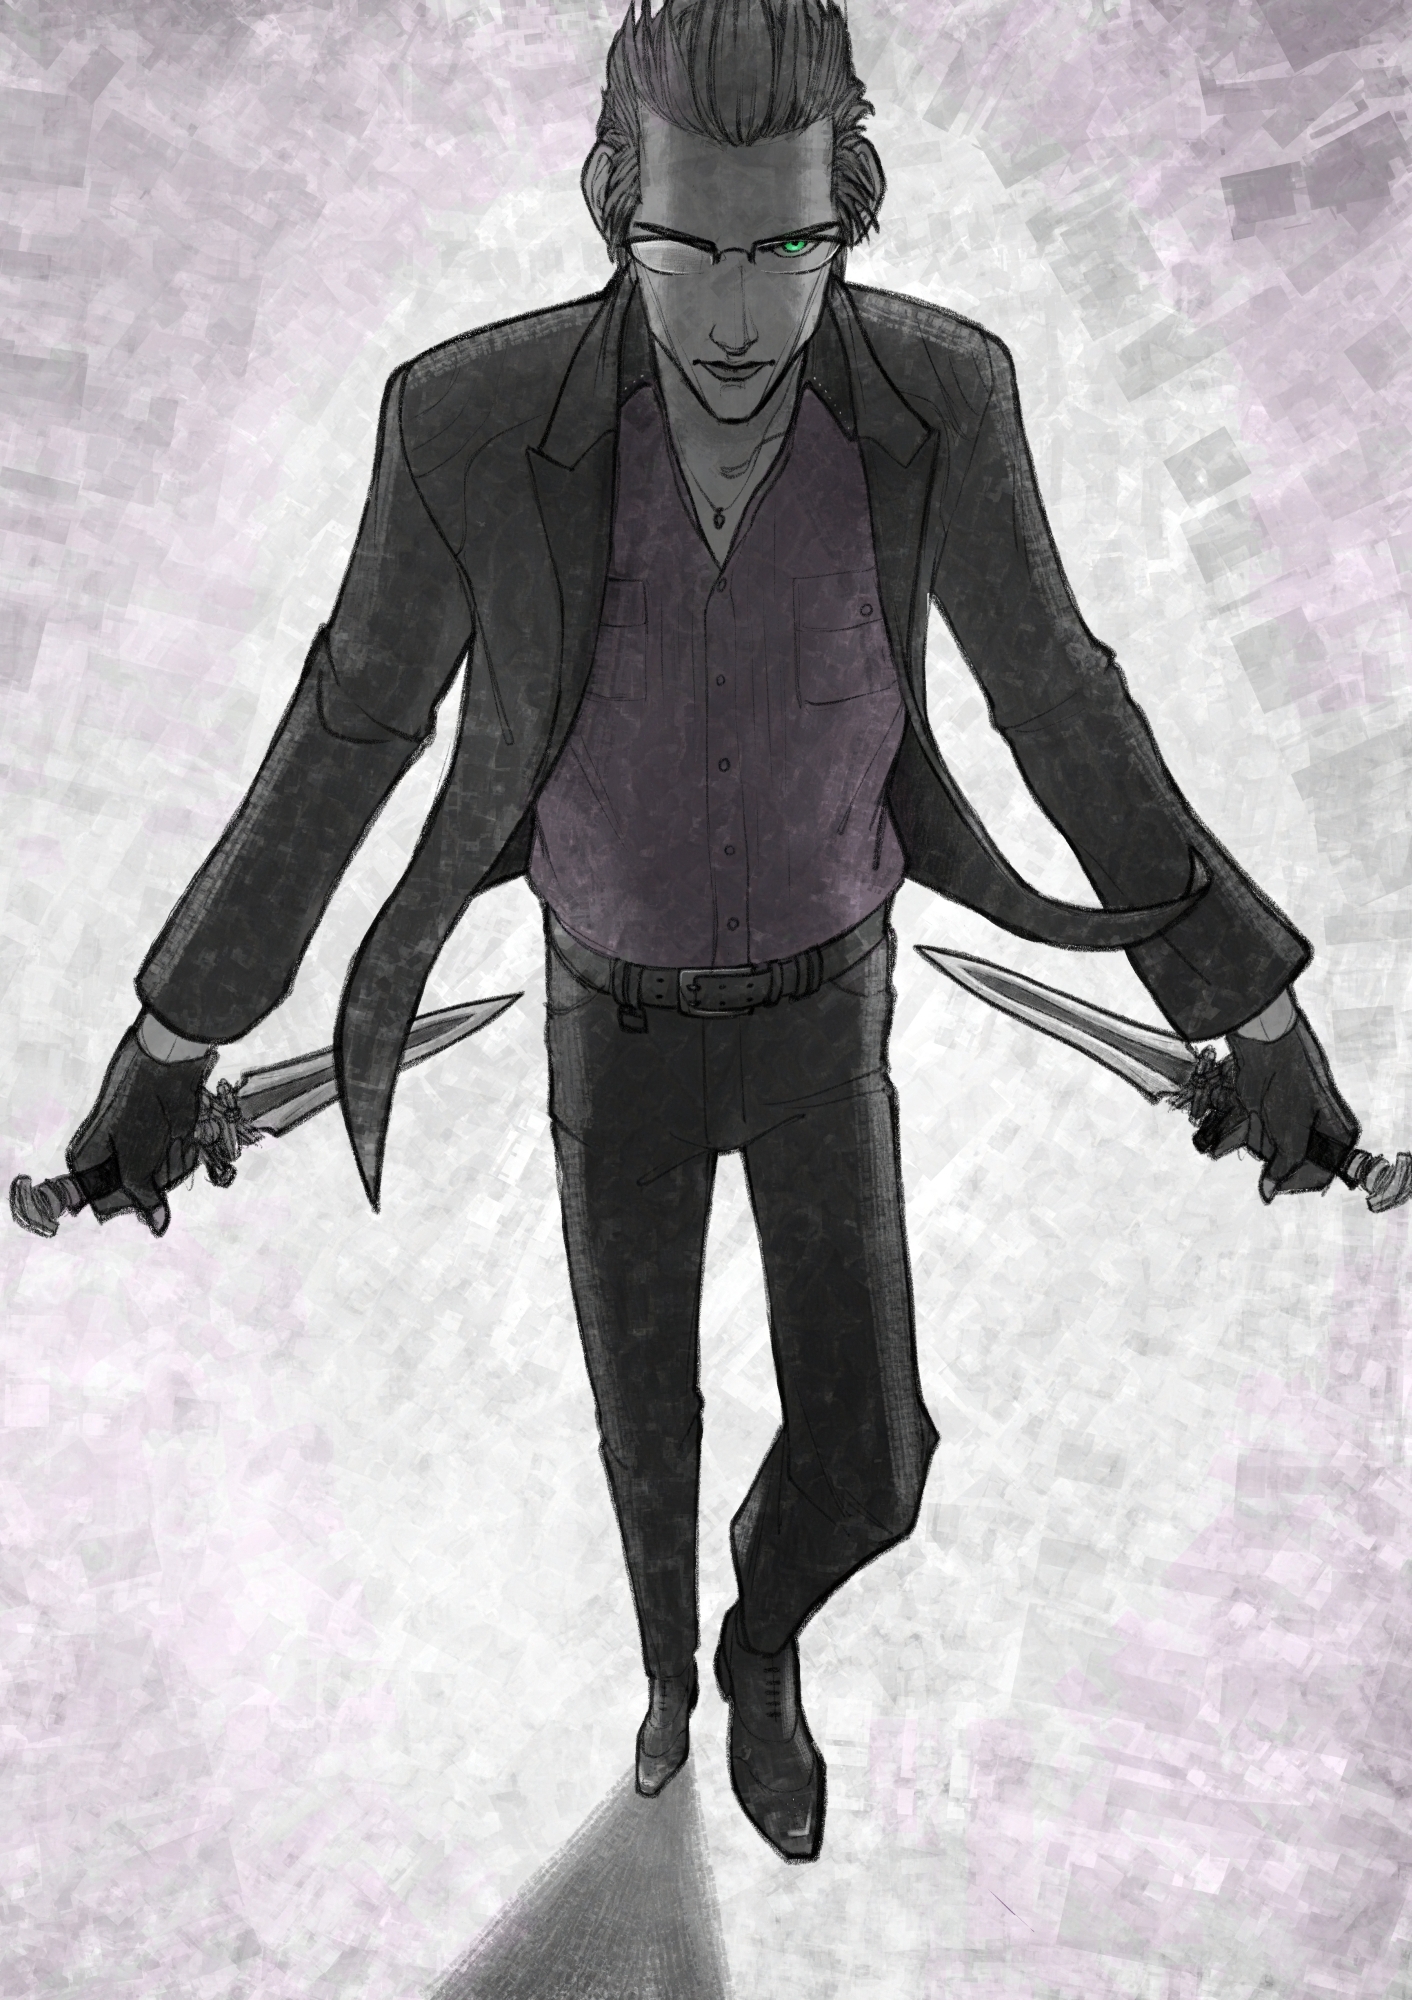 Ignis Scientia, backlit and foreshortened, and holding his daggers in a battle-ready stance. He's looking directly at the viewer, and stepping forward like he's about to attack.